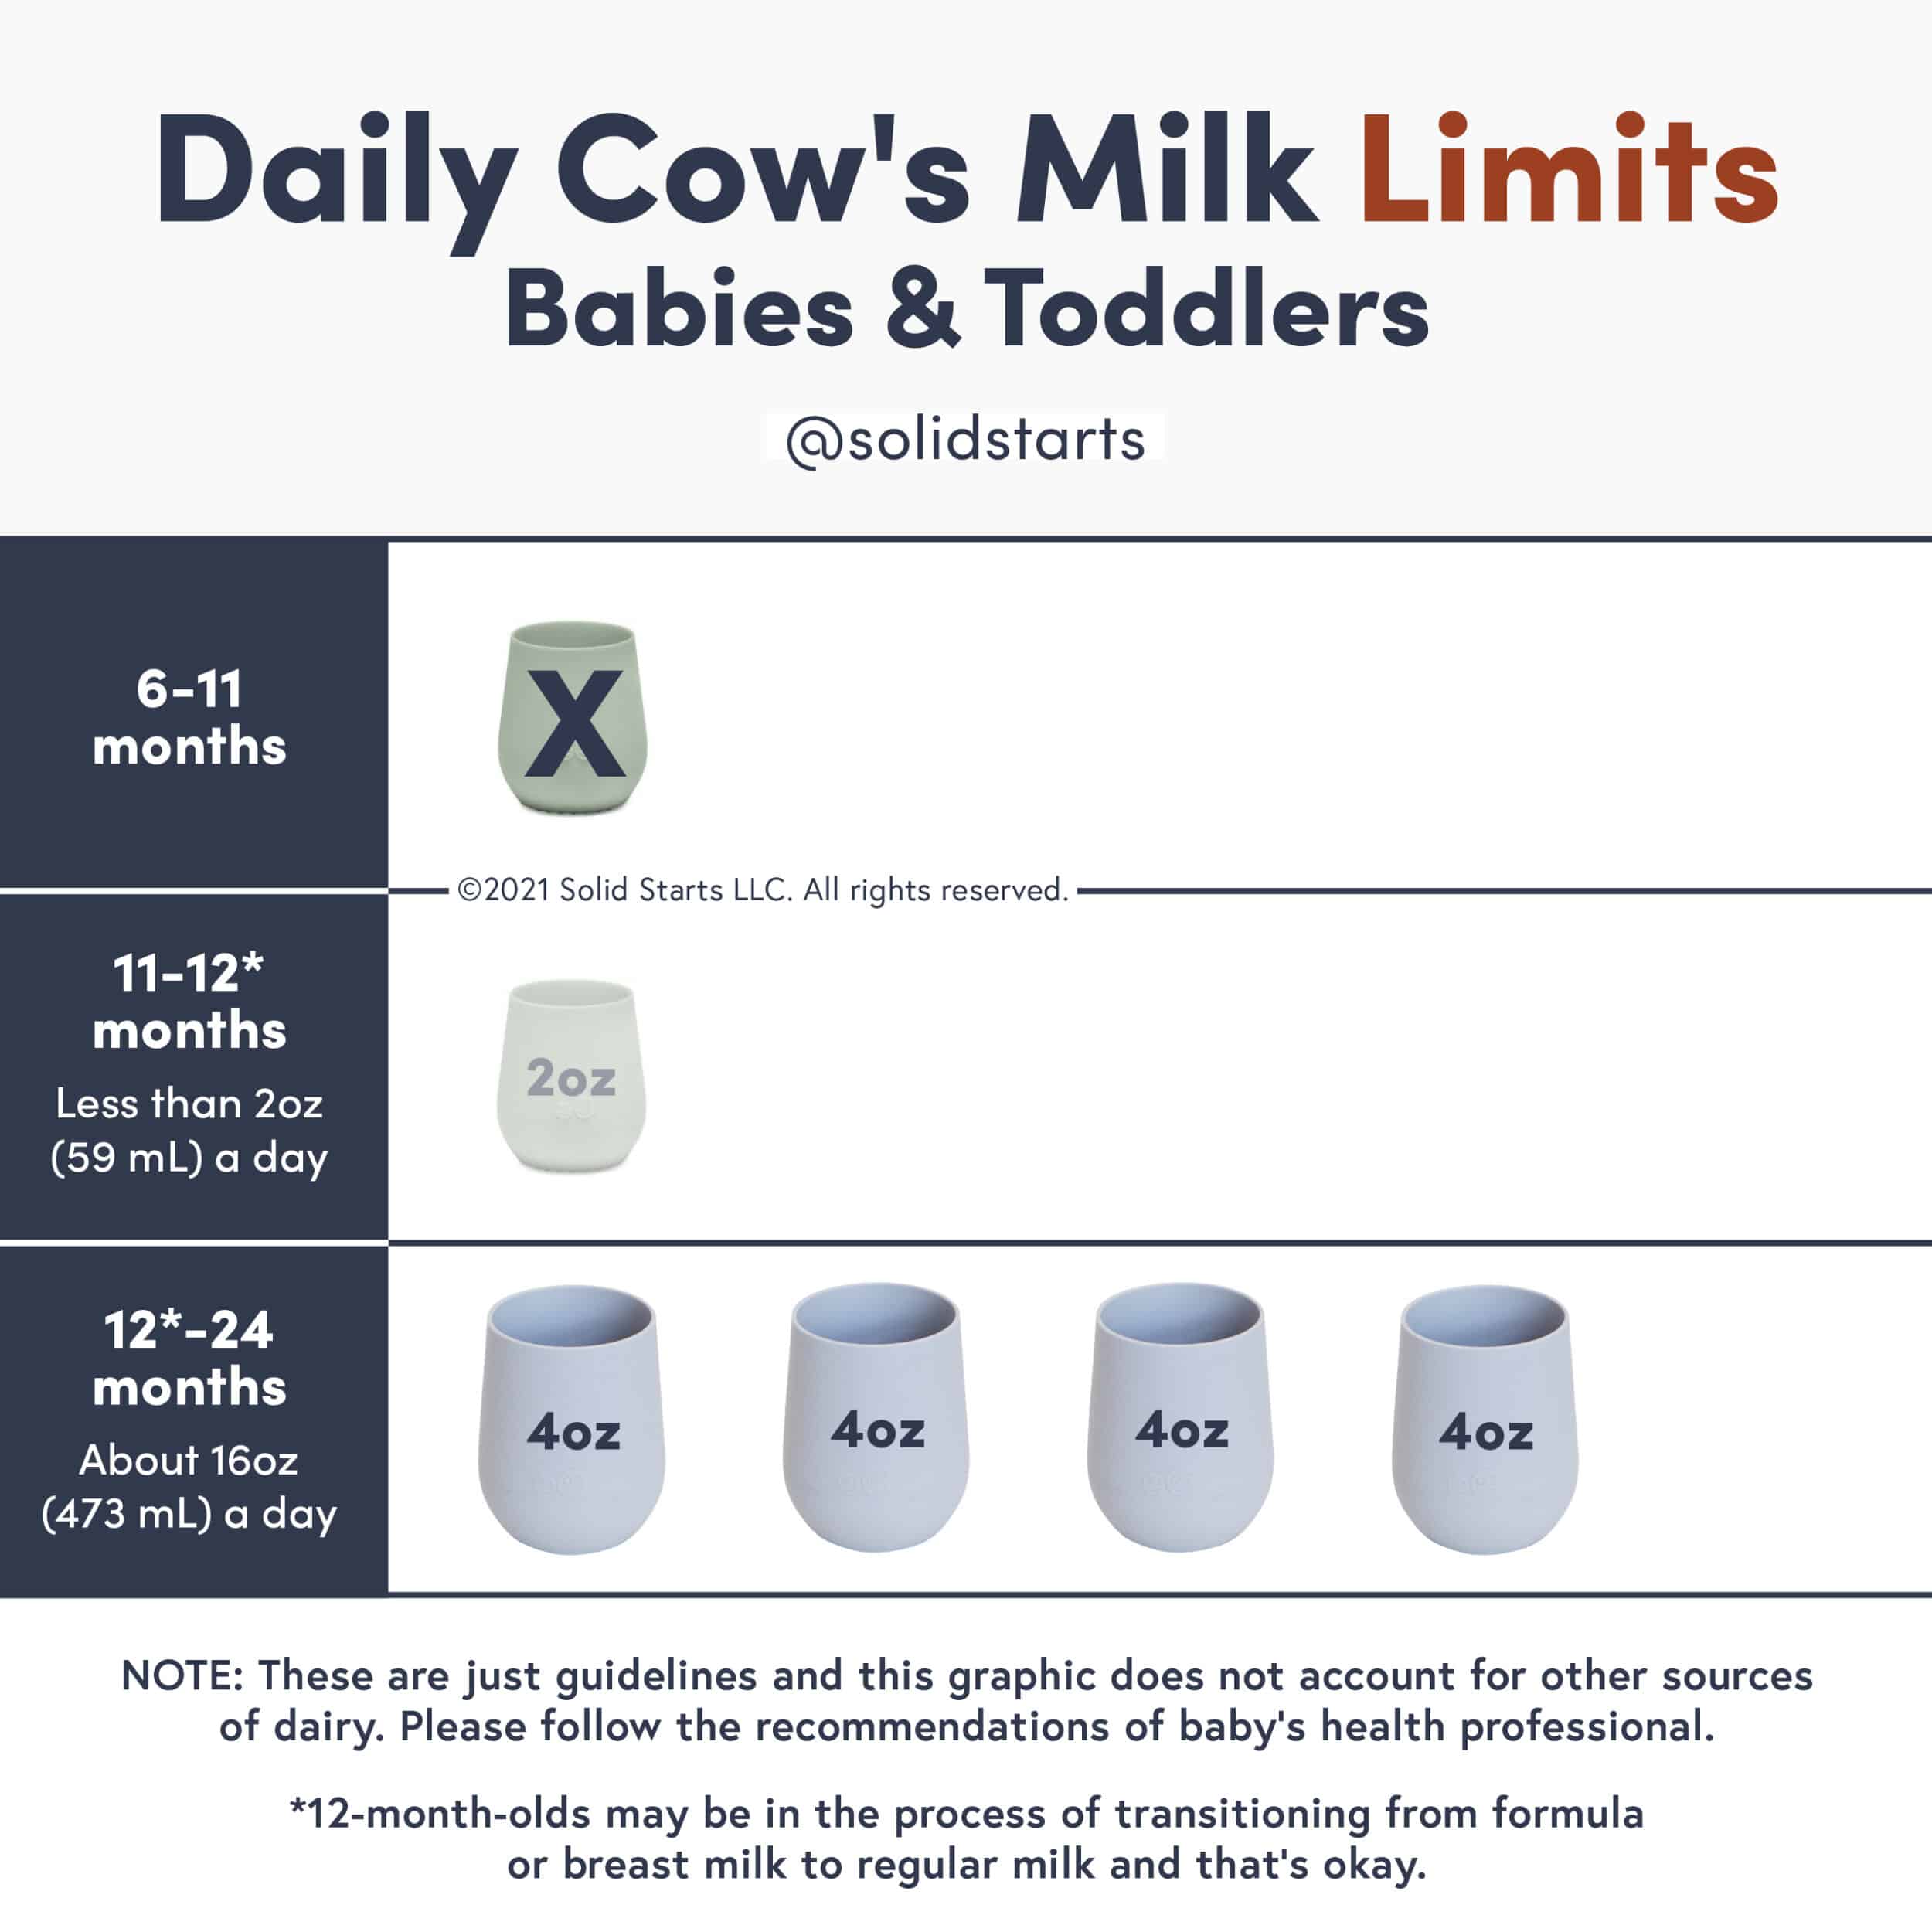 an infographic showing daily cow milk limits for babies and toddlers with no cow milk allowed before 11 months of age, small sips in an open cup around 11-12 mos of age, and a suggested max of 16oz per day for 12-24 months